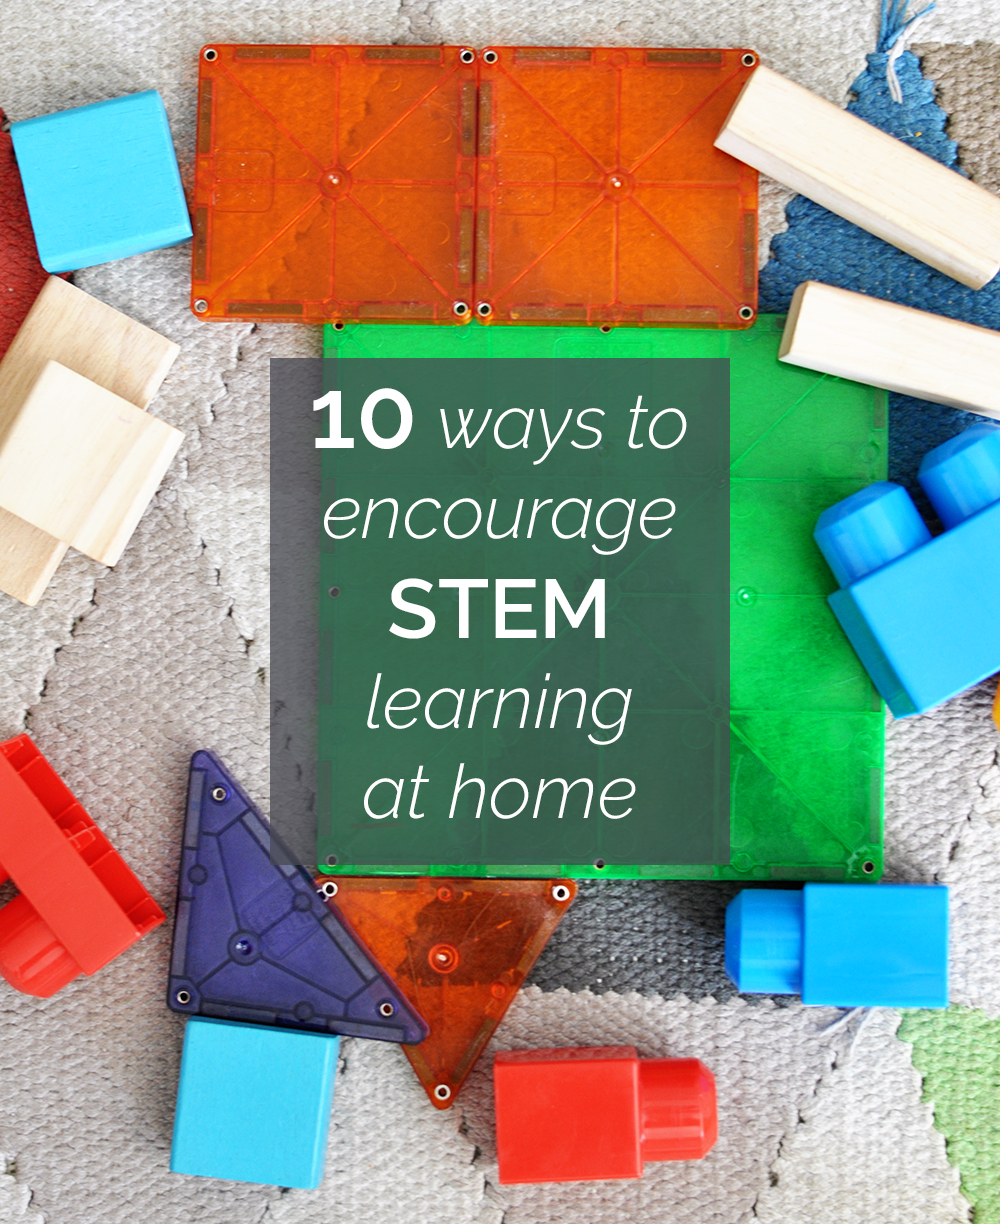 10 ways to encourage STEM learning at home